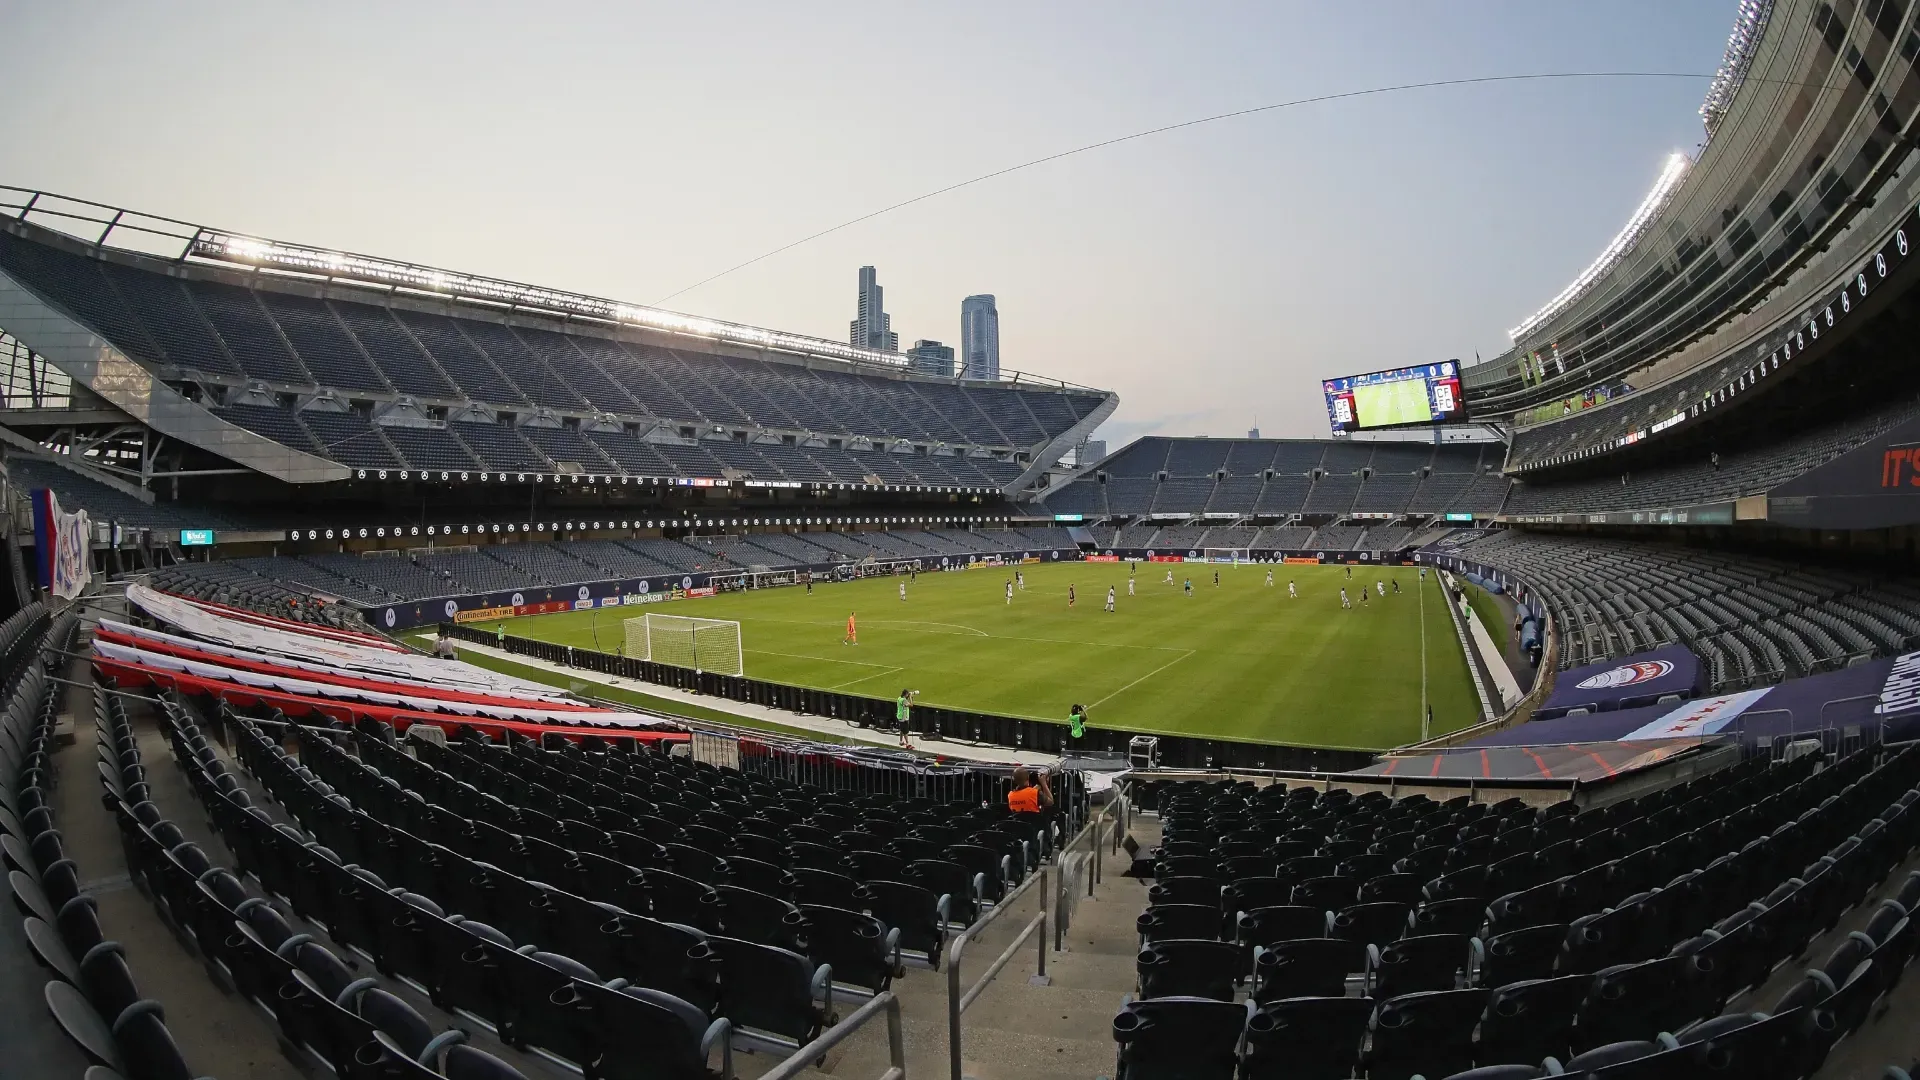 A general view of Soldier Field.